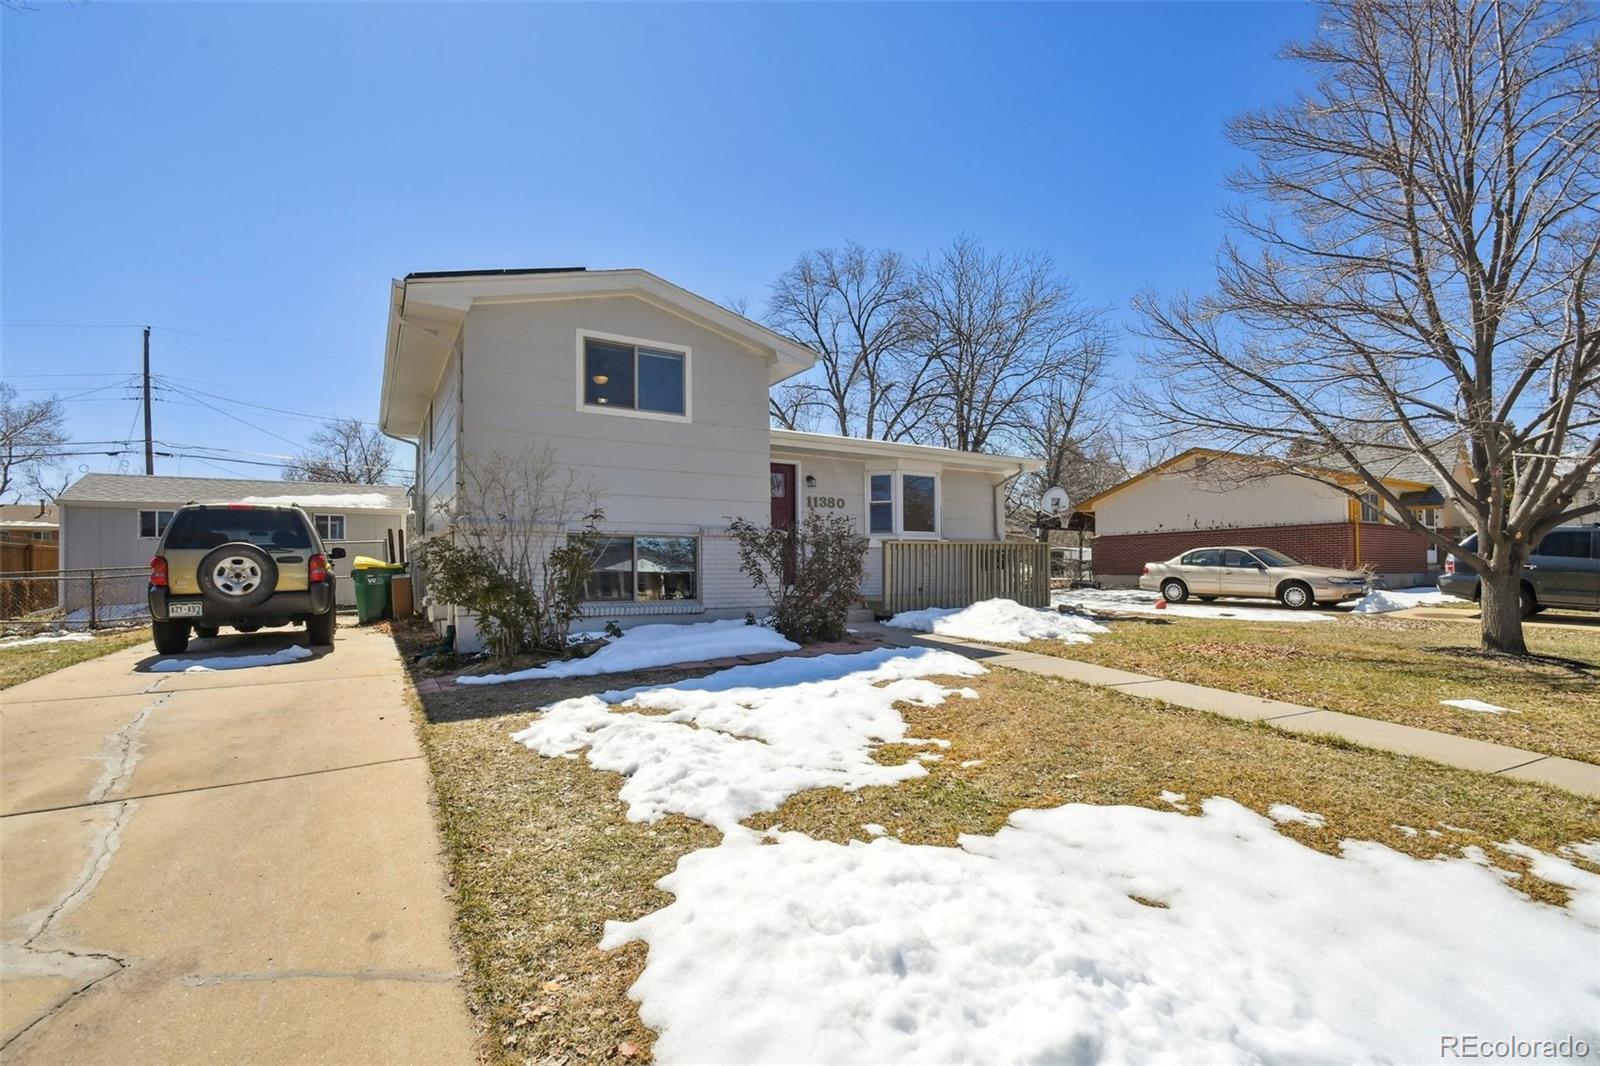 Report Image for 11380 W Exposition Avenue,Lakewood, Colorado